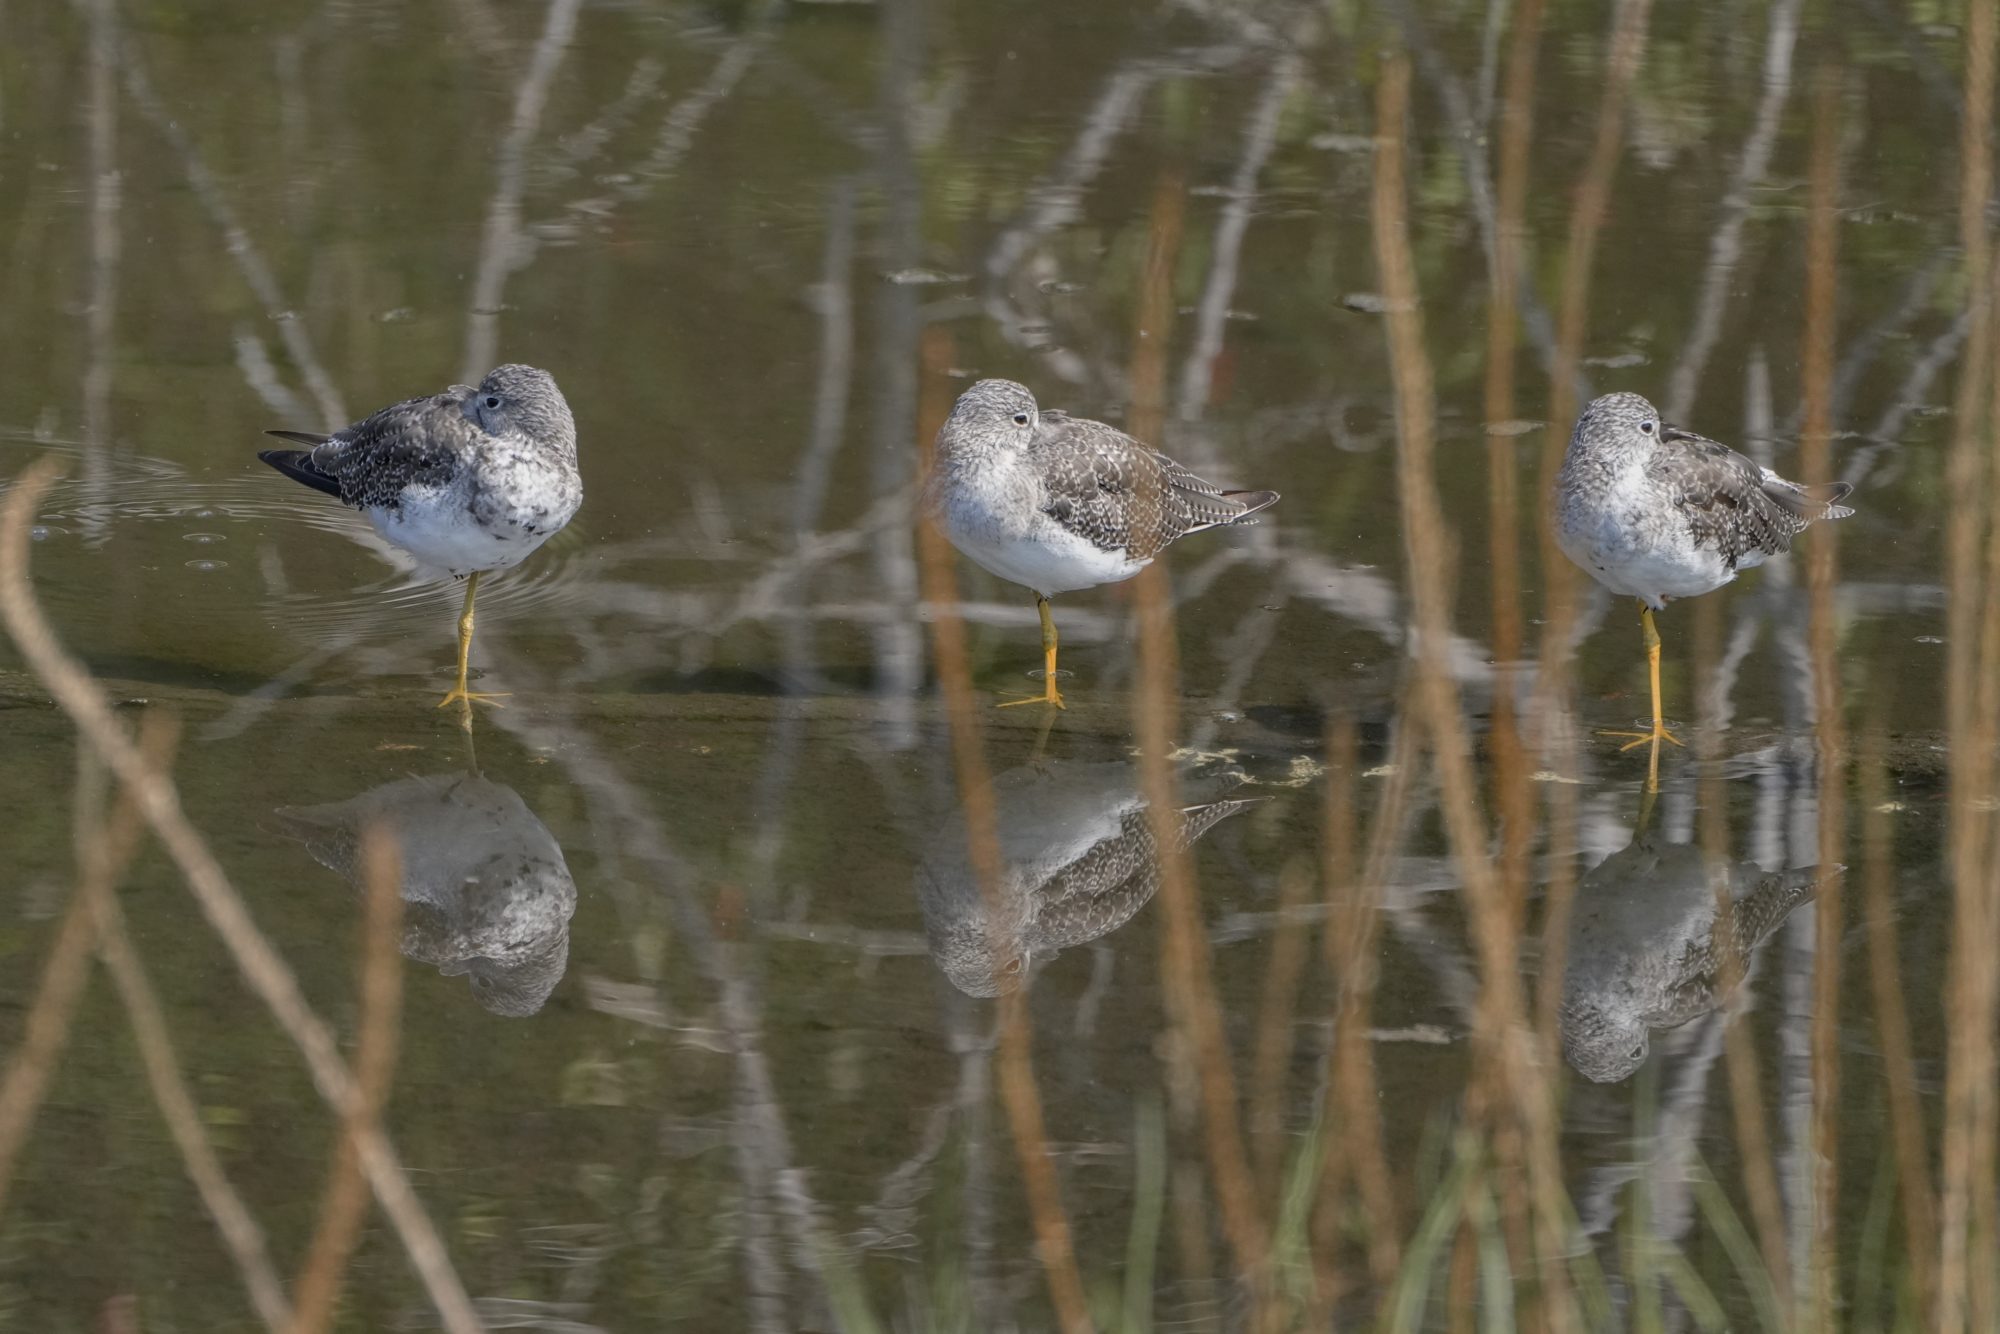 Three Greater Yellowlegs on a log in a little creek, each standing on one leg